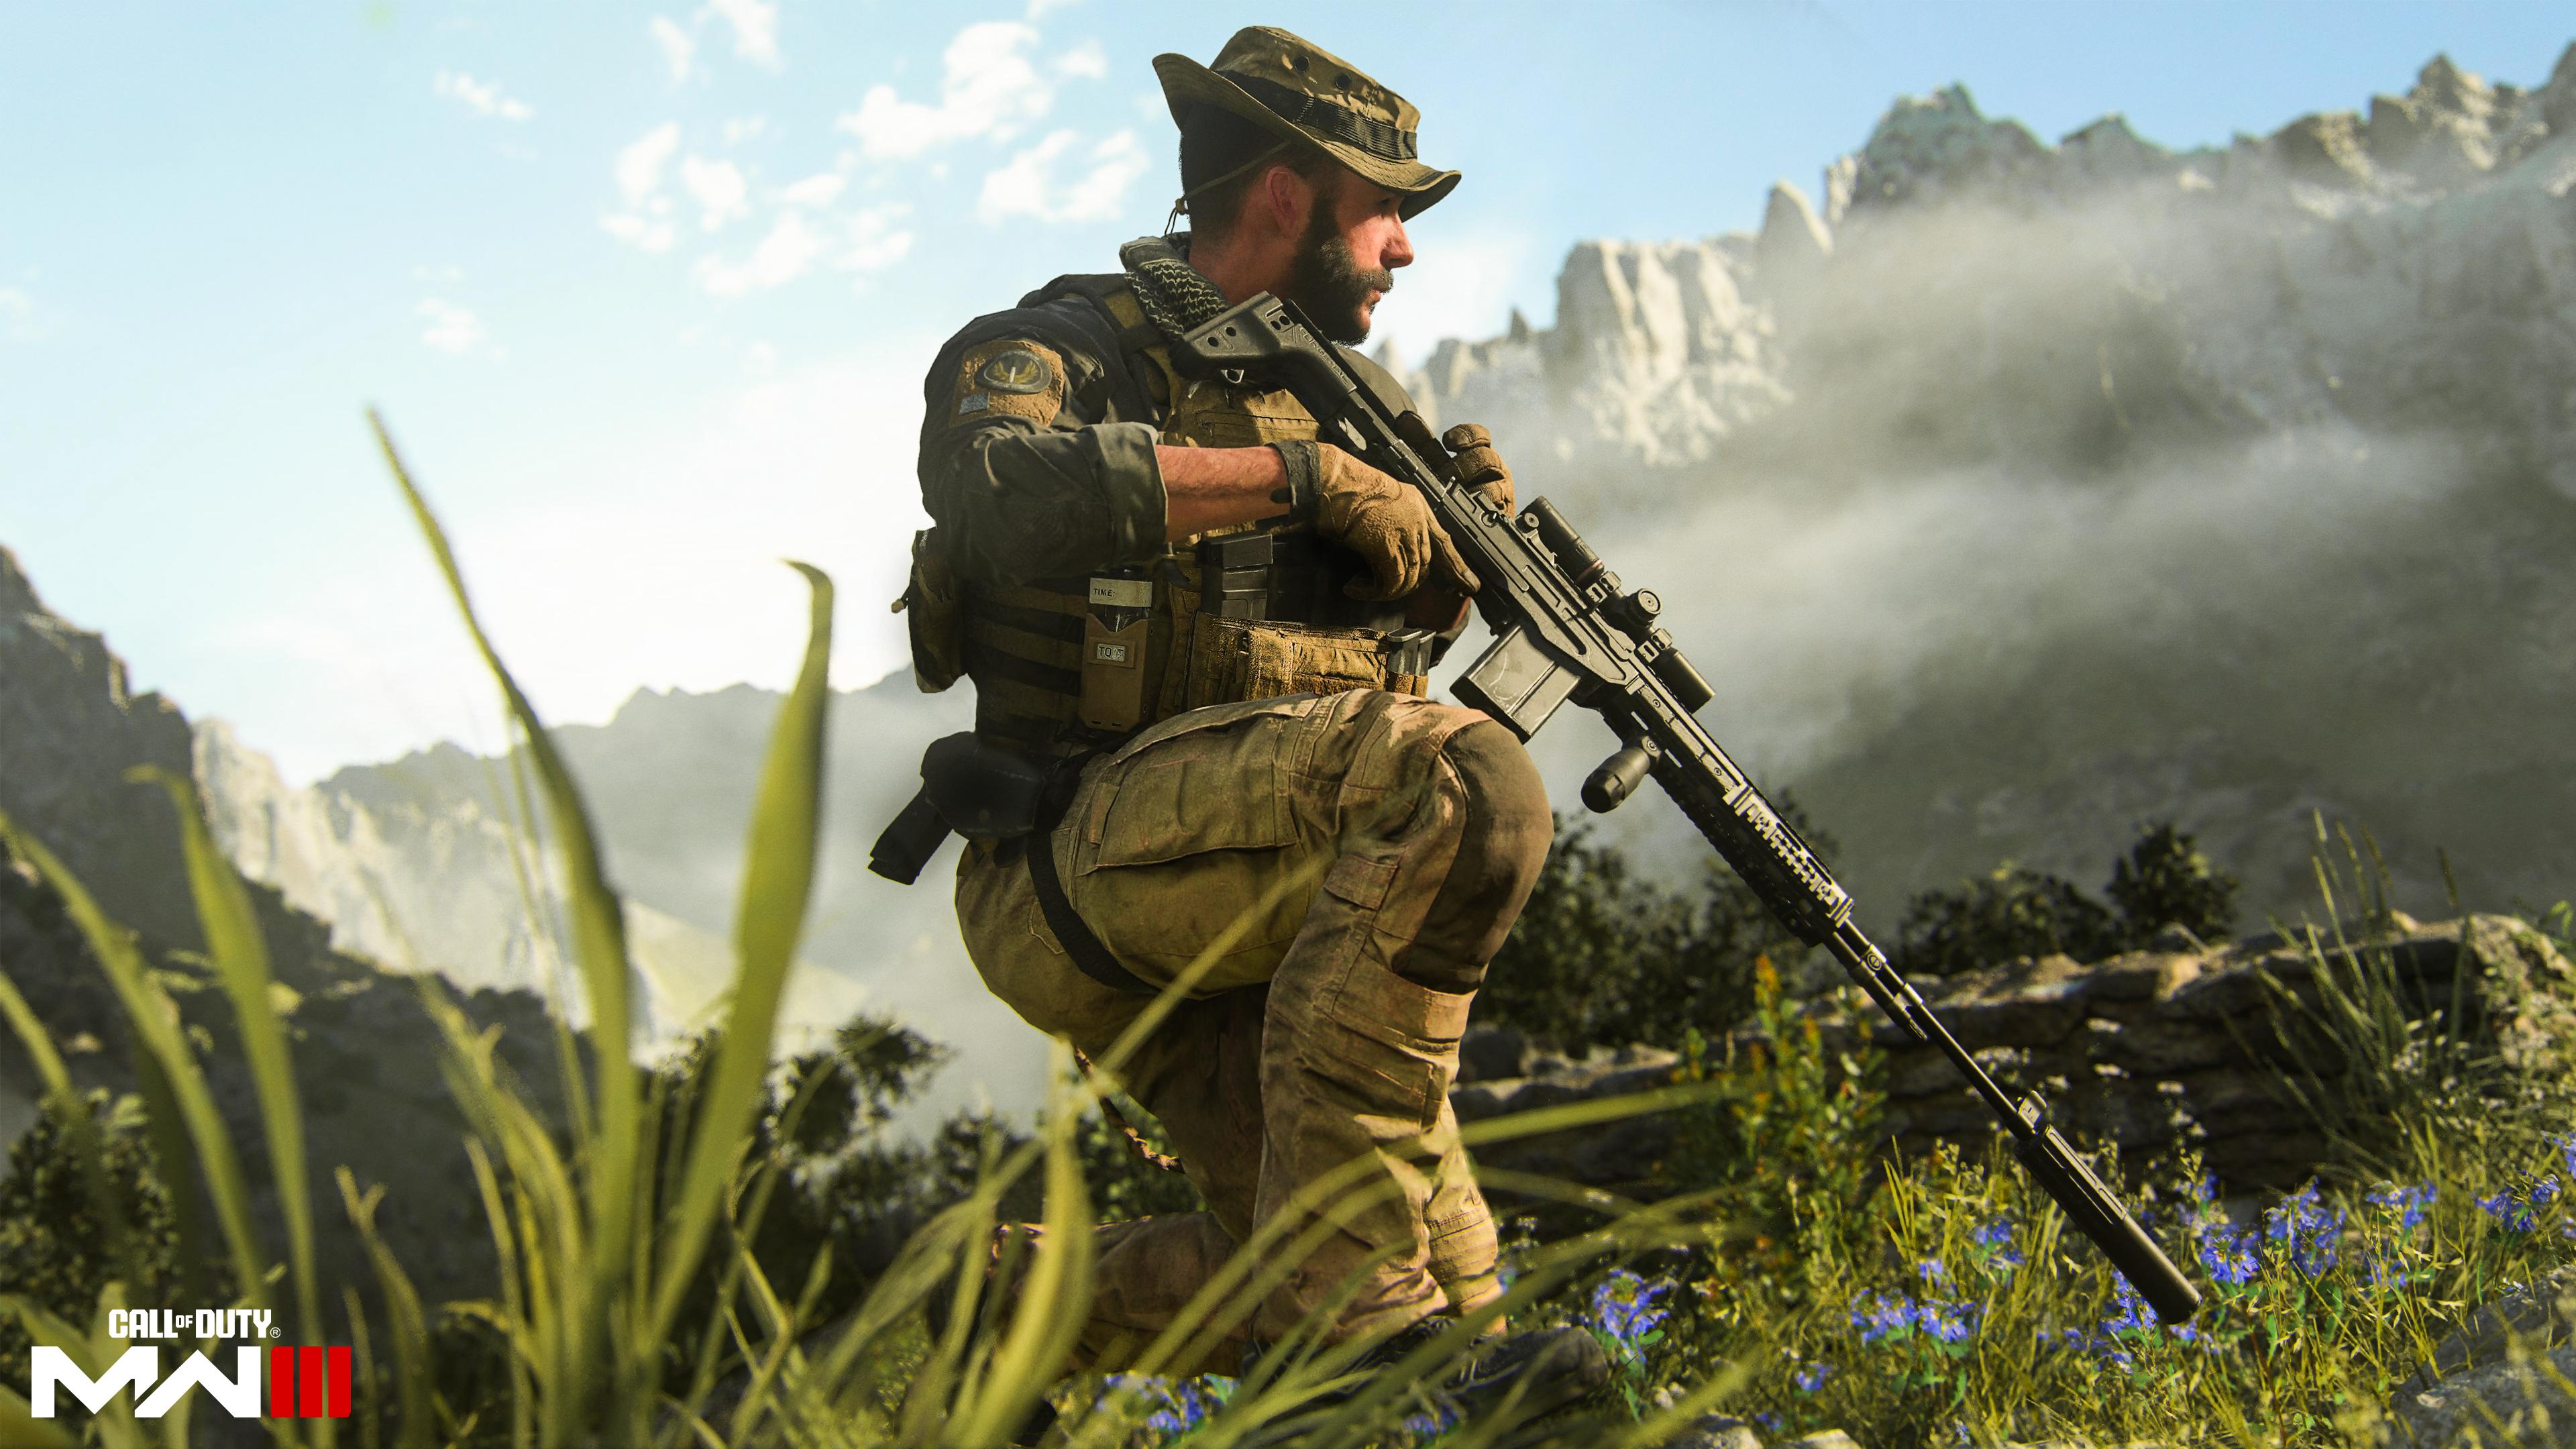 Call of Duty: Modern Warfare III, out Nov. 10 for Microsoft and Sony consoles and PCs, continues the story of Captain Price and Task Force 141.